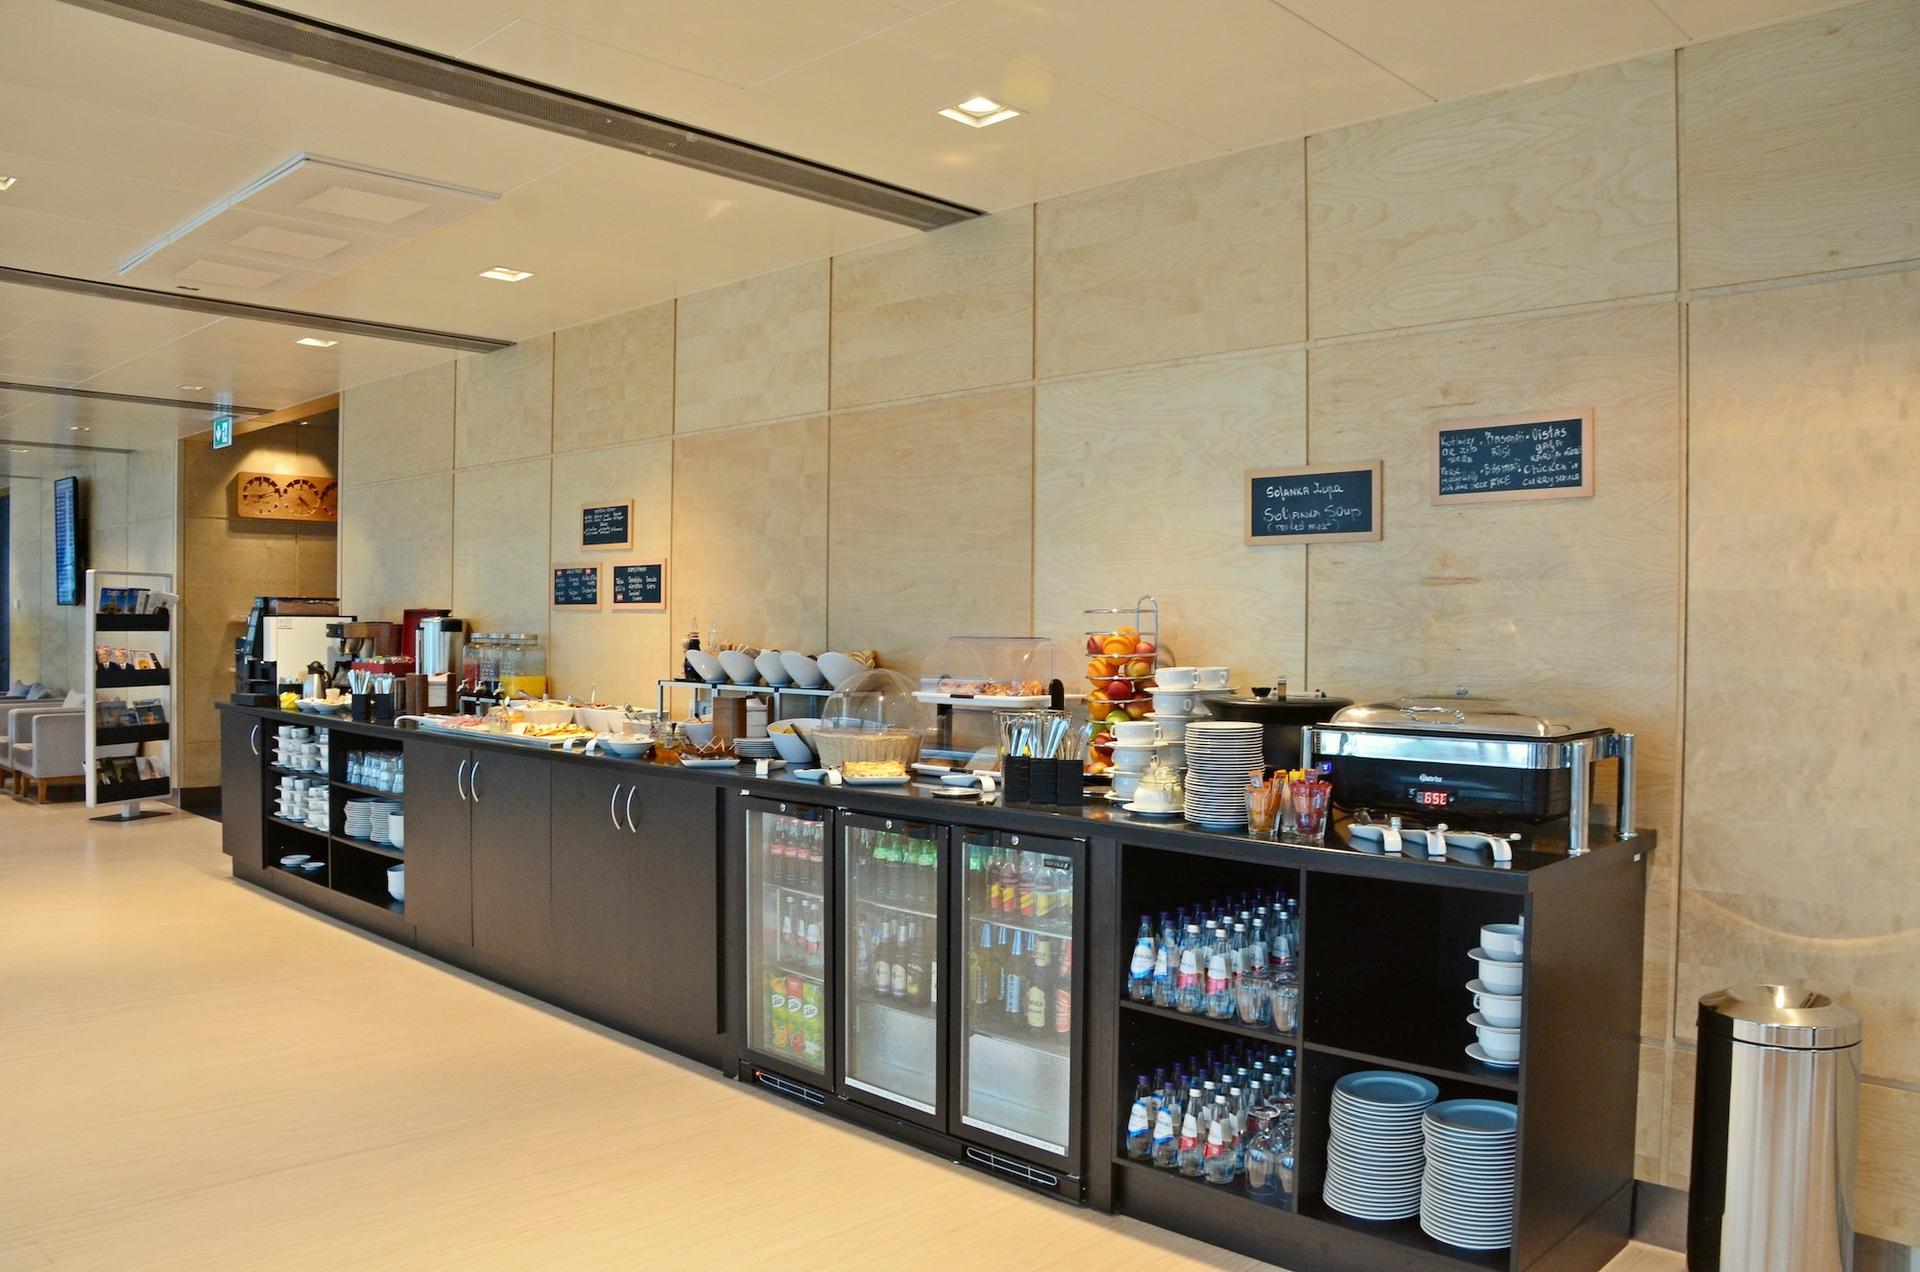 Primeclass Business Lounge image 44 of 48